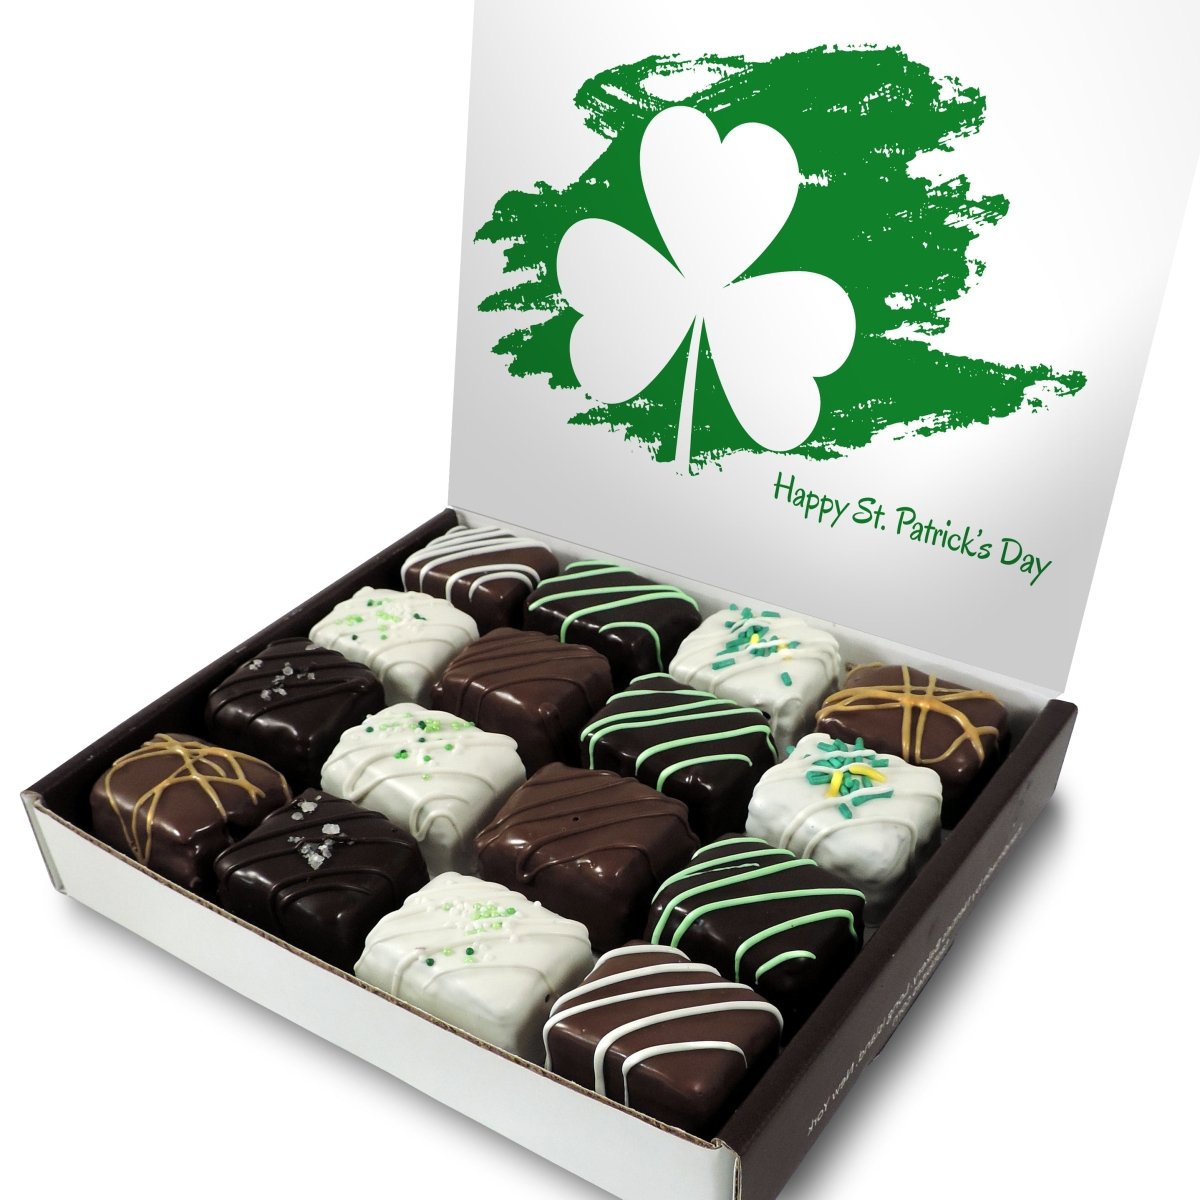 The St. Patrick's Day Box - Nettie's Craft Brownies